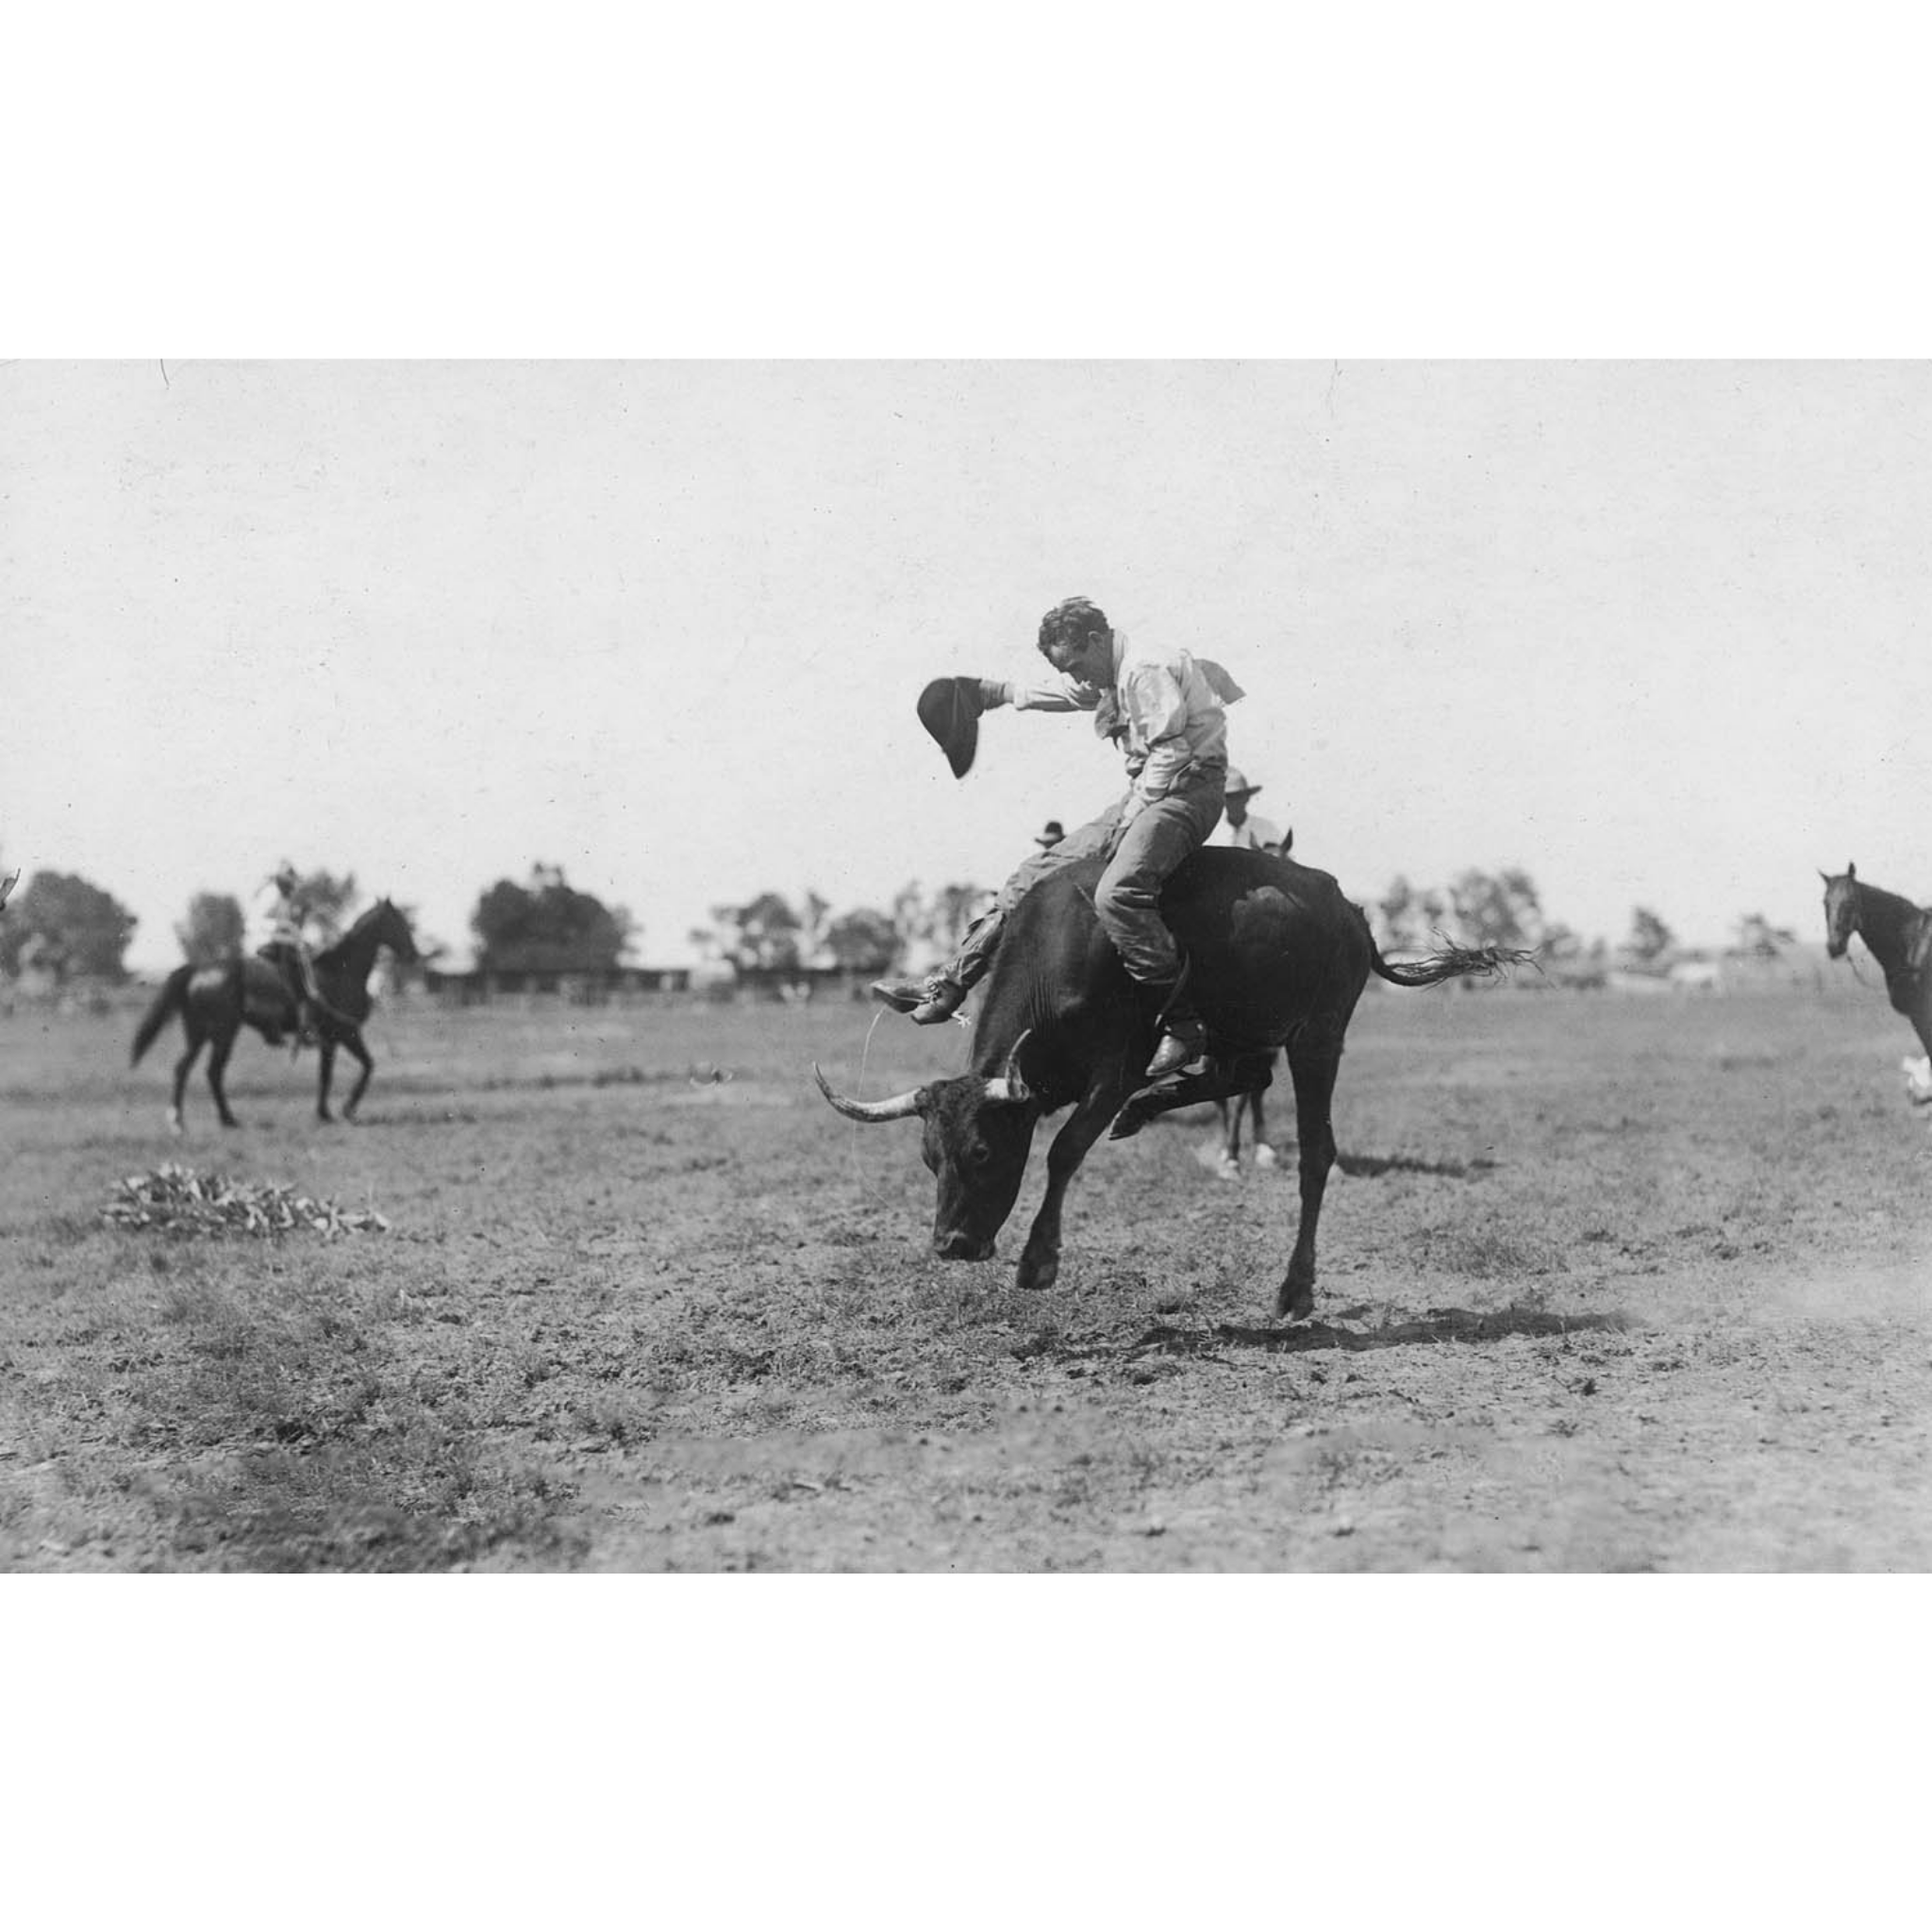 Rodeo Cowboys 13 - Riding Steer - ca. 1916 Photograph